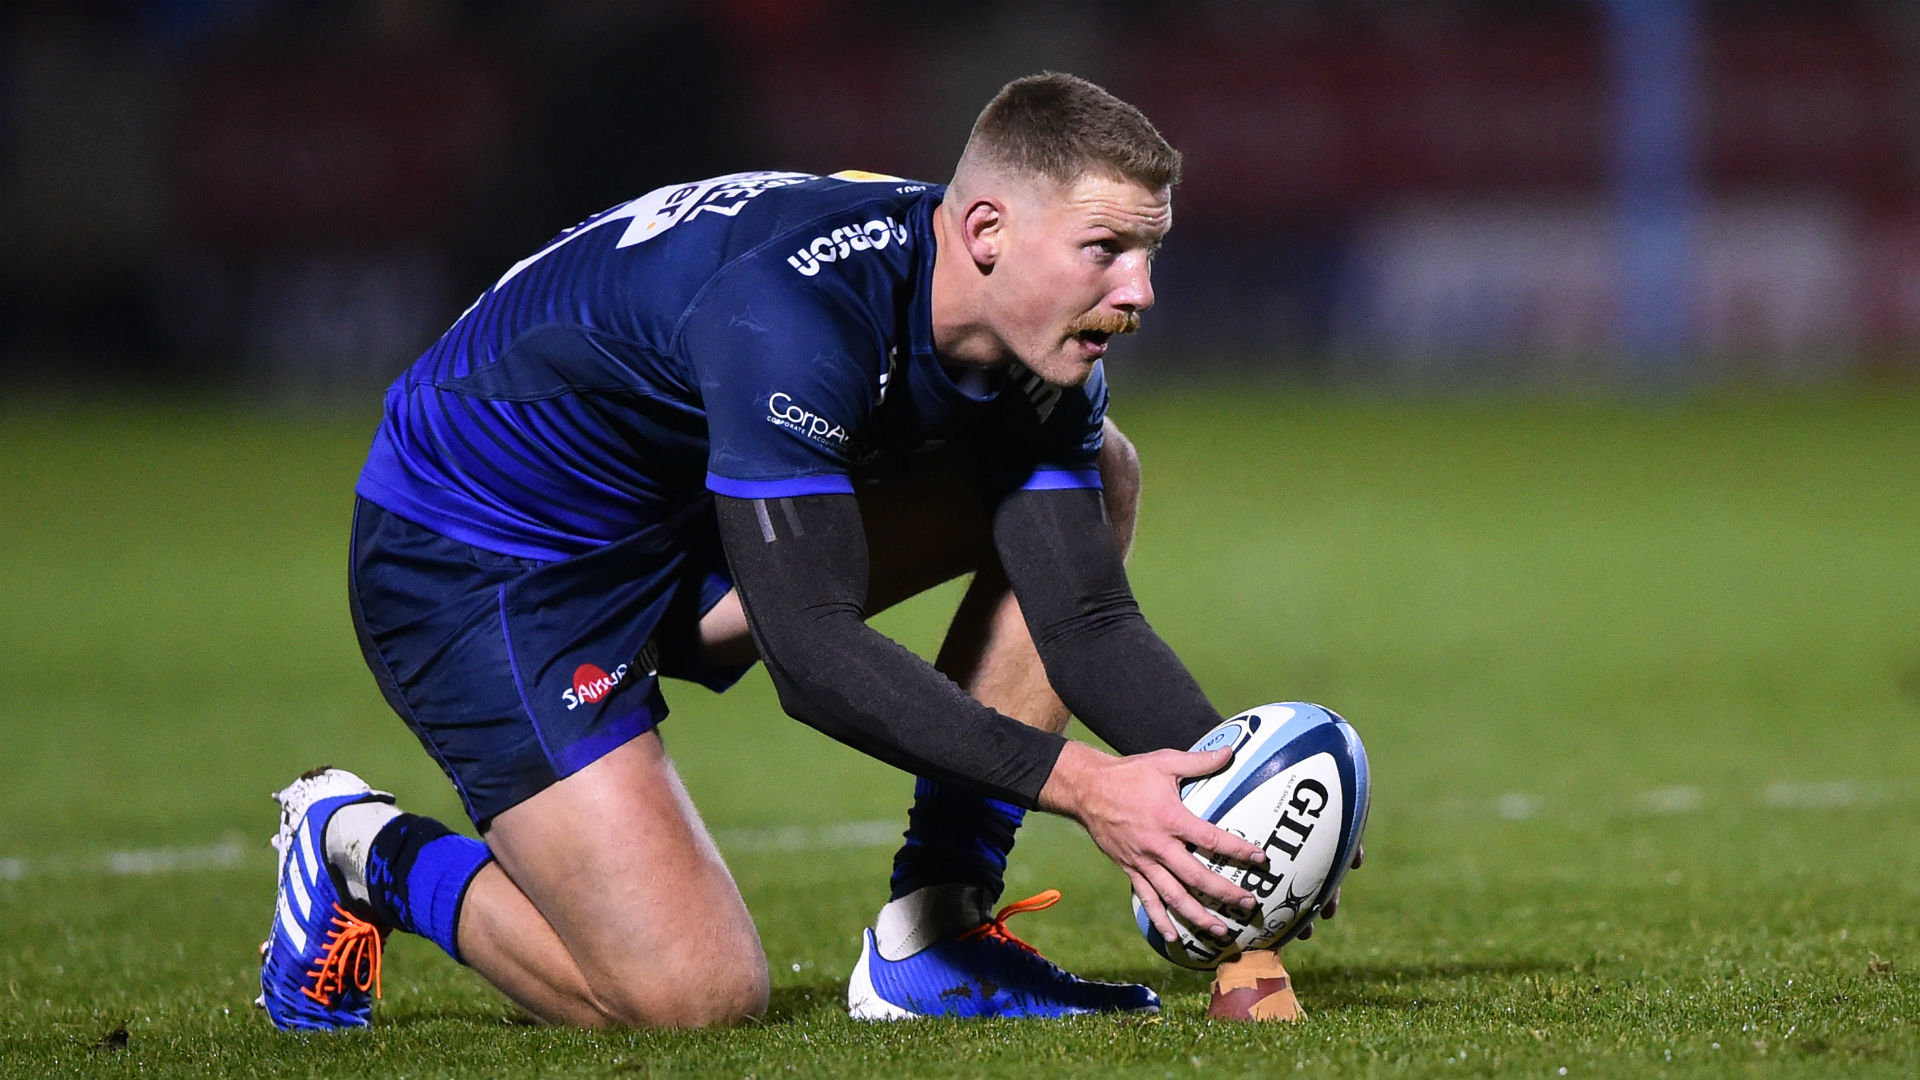 Rob du Preez kicked 17 points while his brother Dan scored Sale Sharks' only try in a hard-fought 28-18 Premiership victory over Wasps.